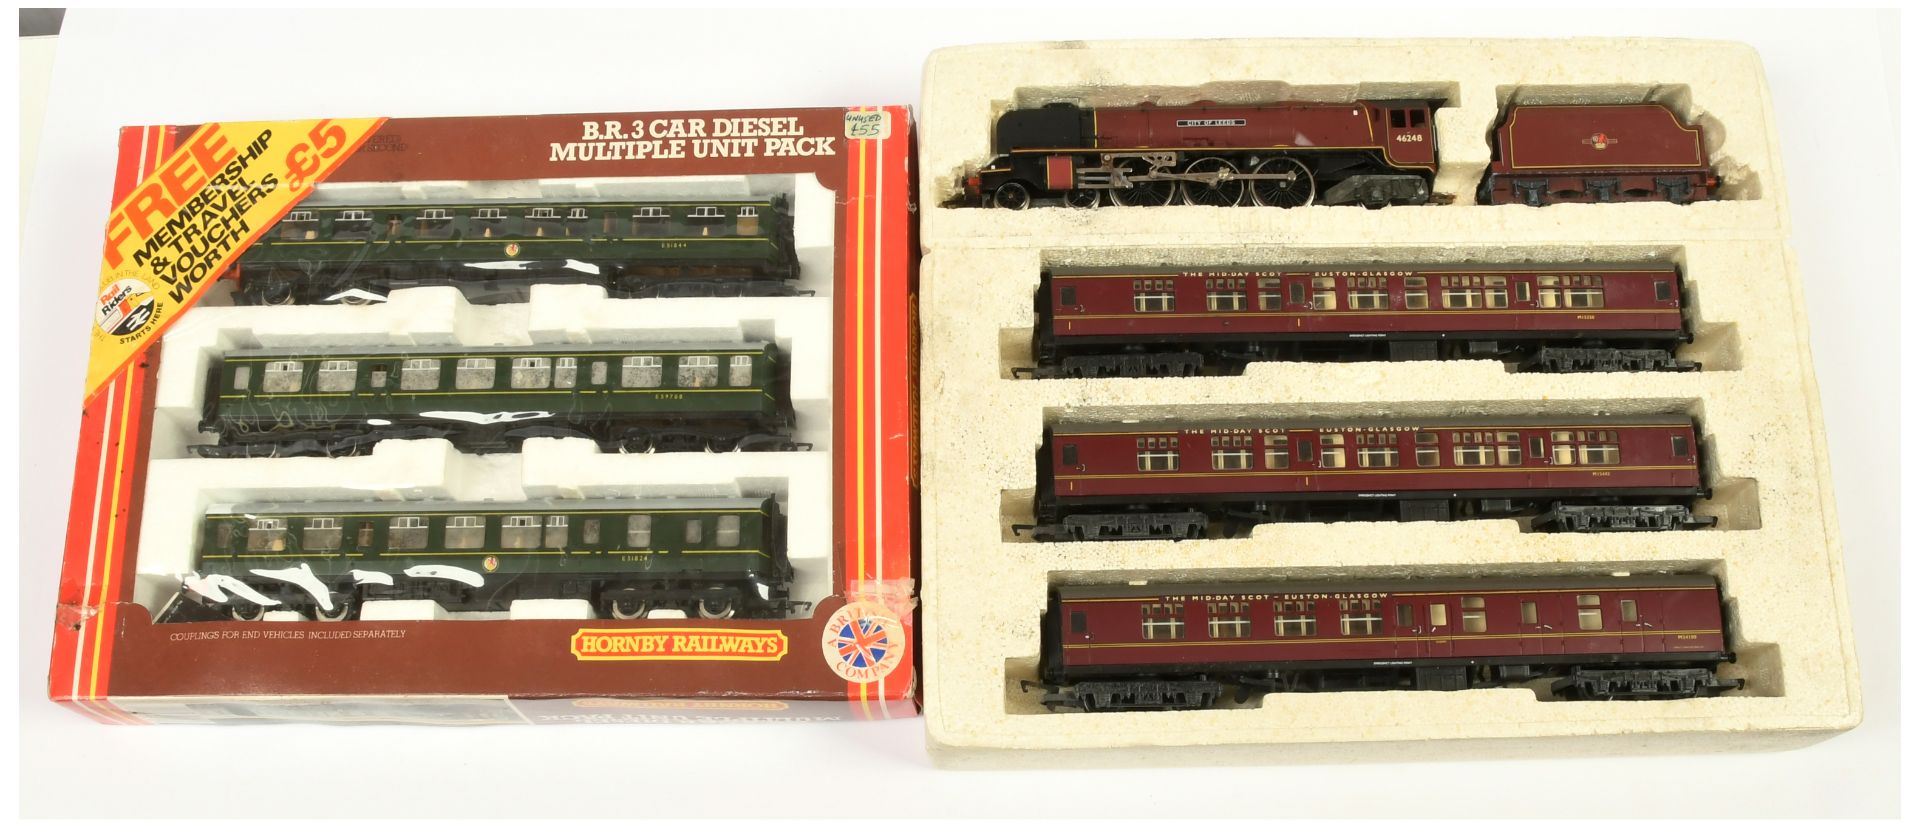 Hornby (GB) a pair of Train packs comprising of 